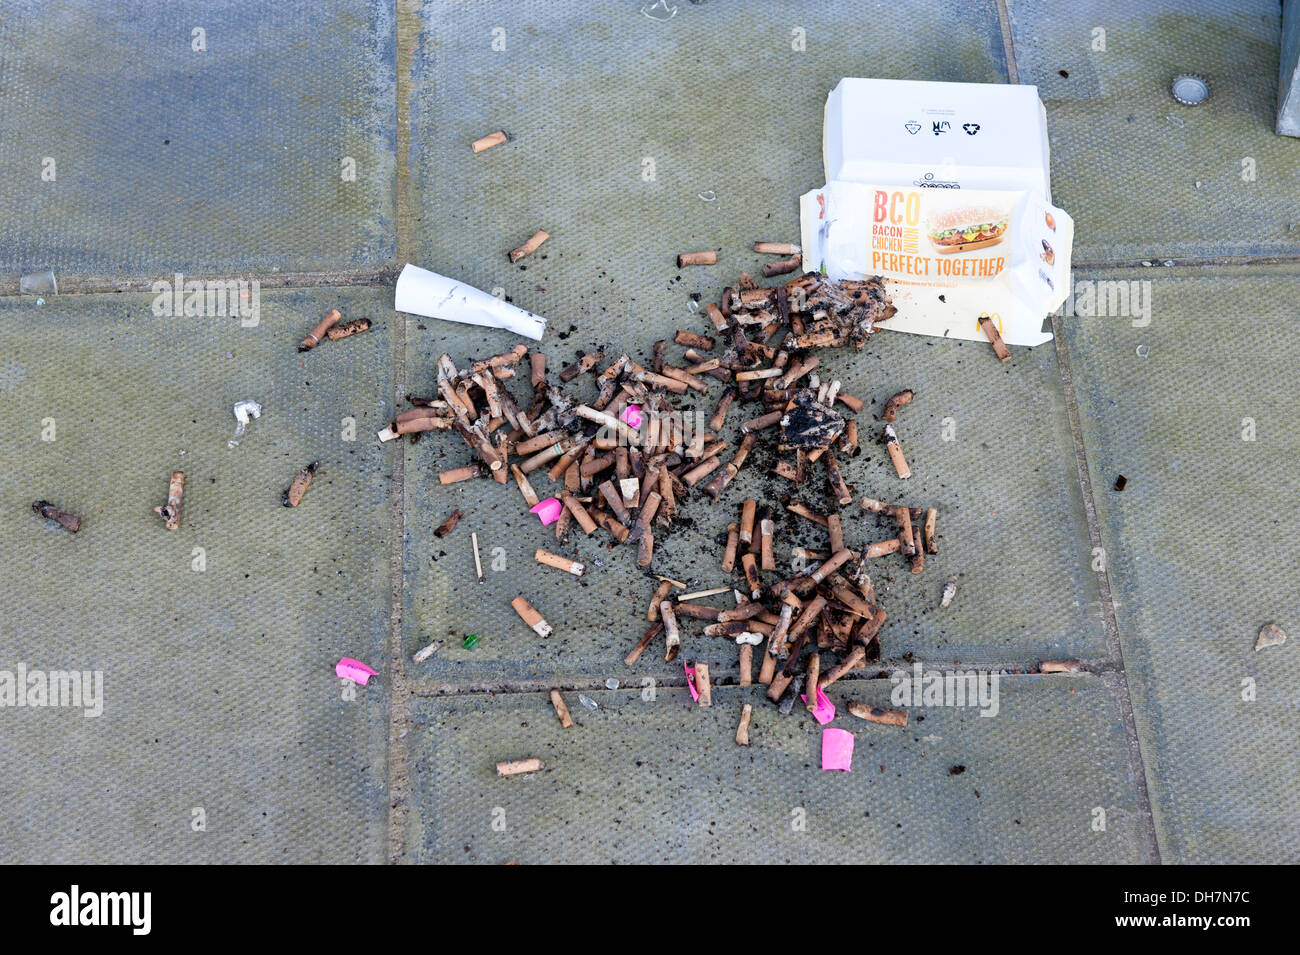 Dirty ashtray rubbish cigarette ends dropped on floor Stock Photo